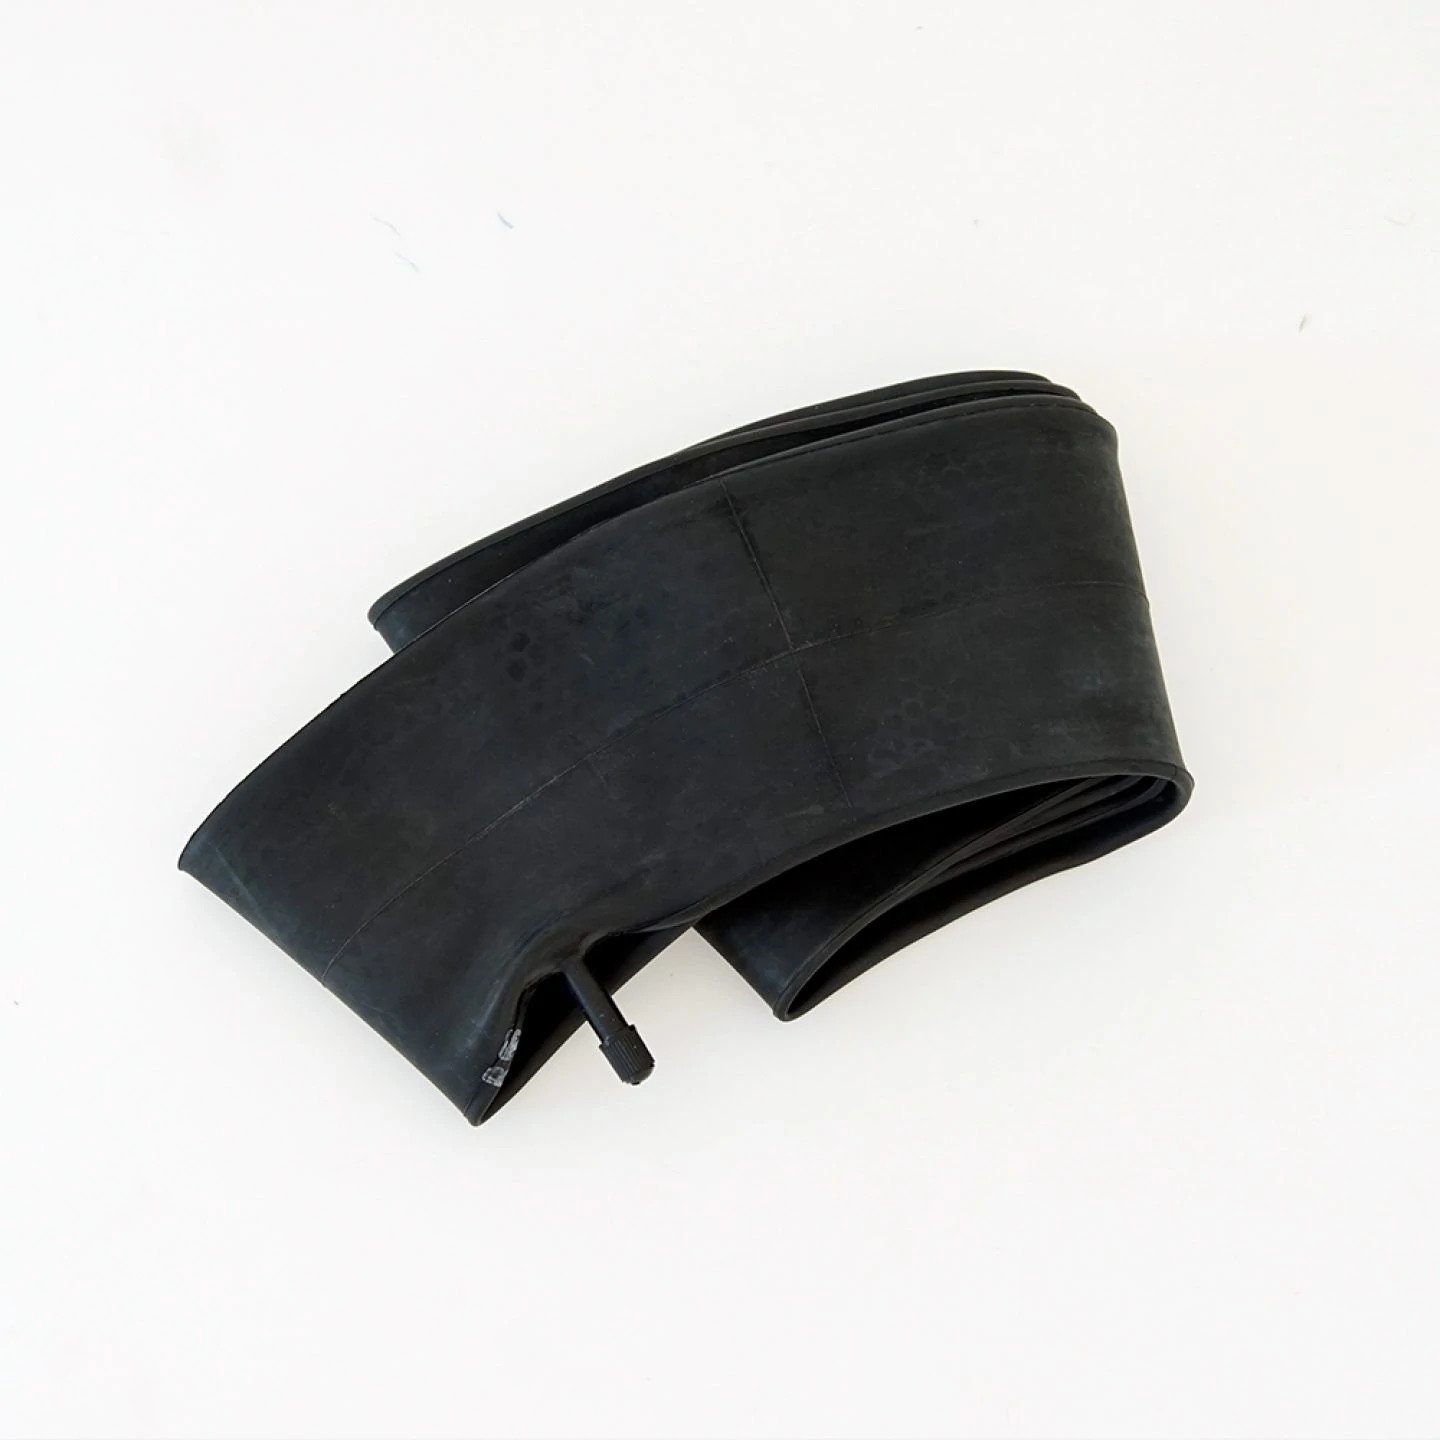 Fatbike inner tube (20x4) Replacement for a 20x4 fatbike inner tyre. Fit's most major brands.